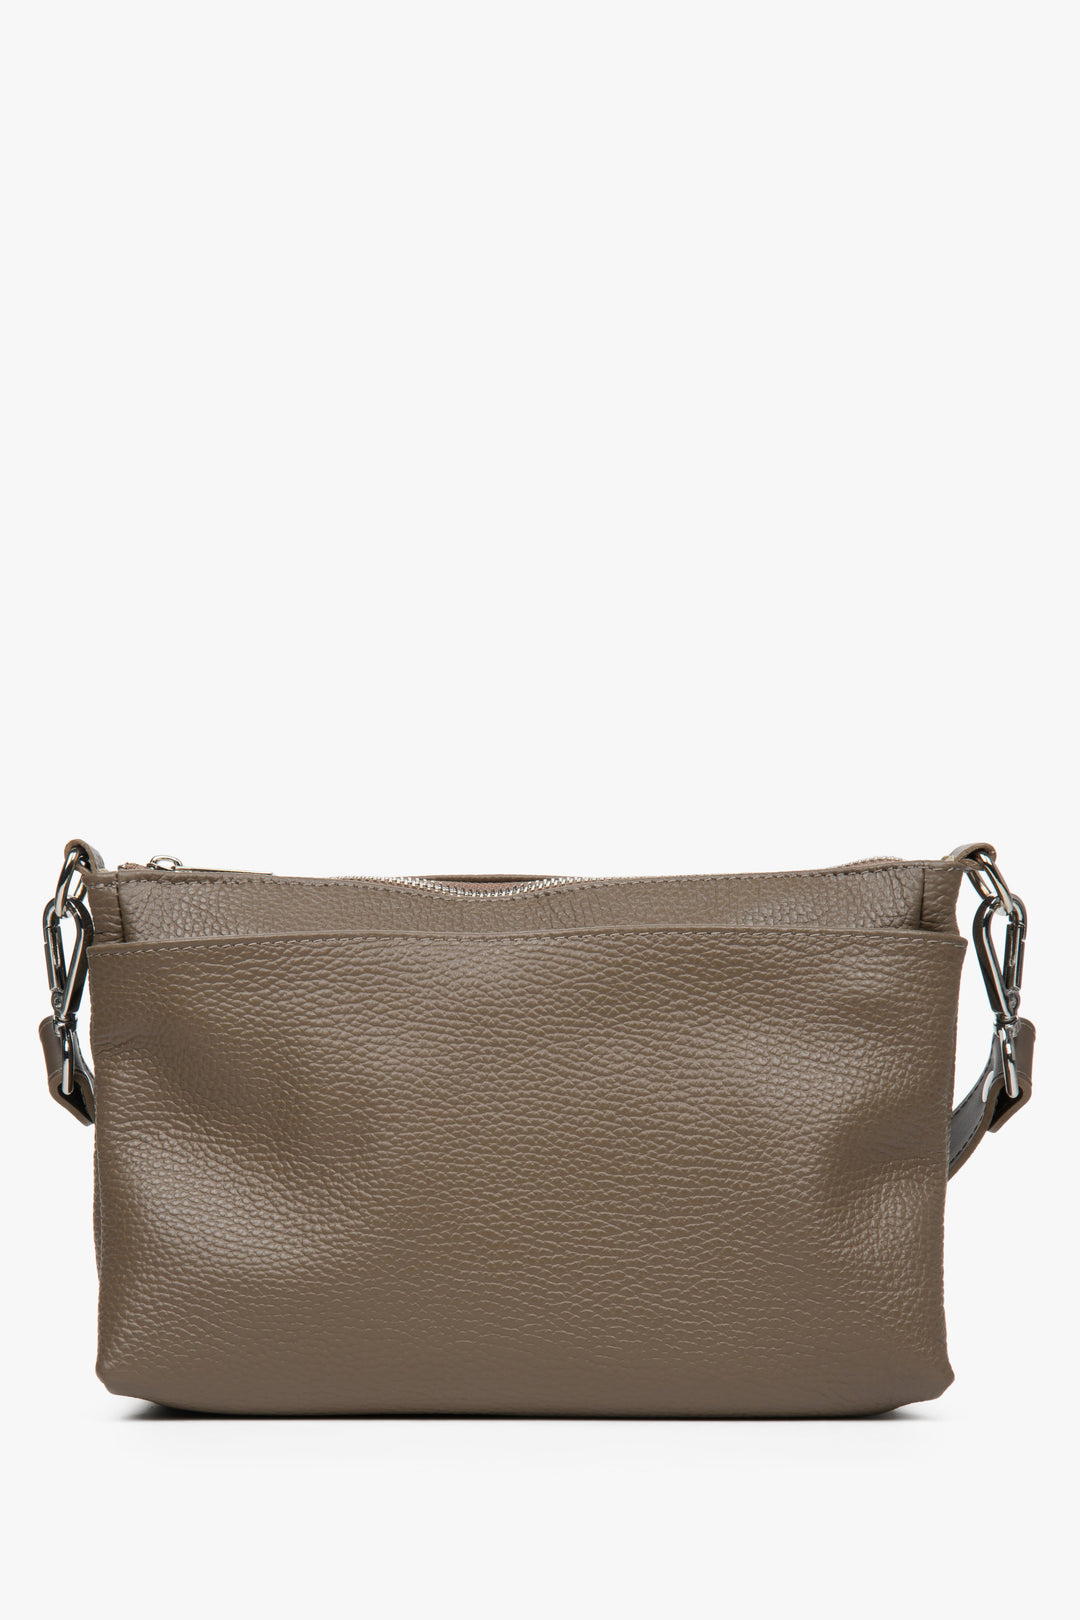 Leather, brown Estro women's crossbody bag with a zipper.